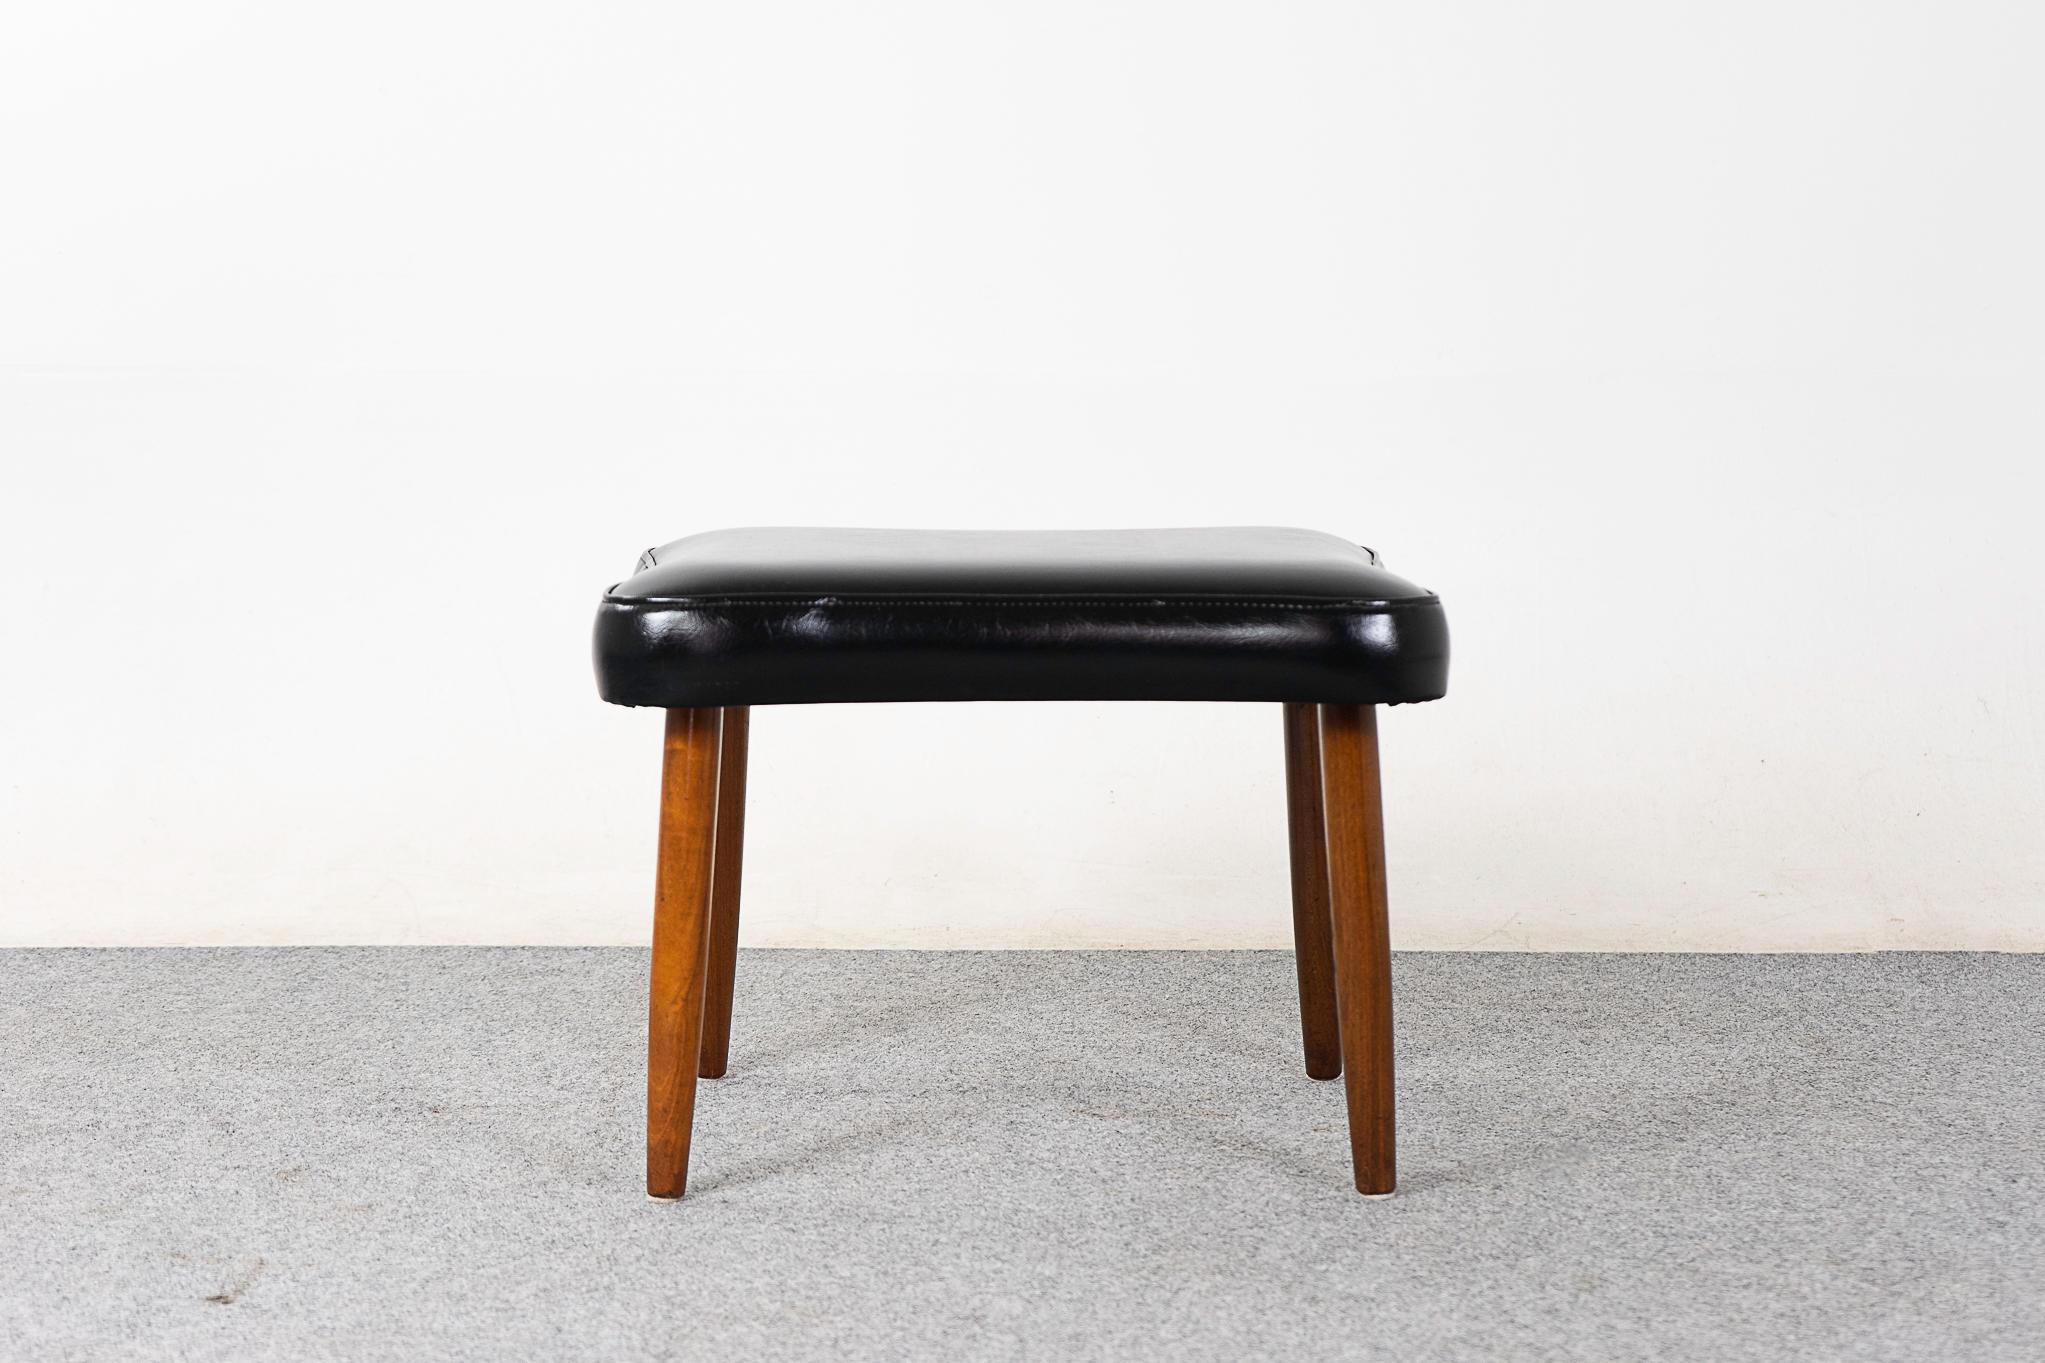 Teak and vinyl footstool, circa 1960's. Compact design with original jet black upholstery with soft rounded edges. Sleek conical legs with nice patina!

Please inquire for remote and international shipping rates.